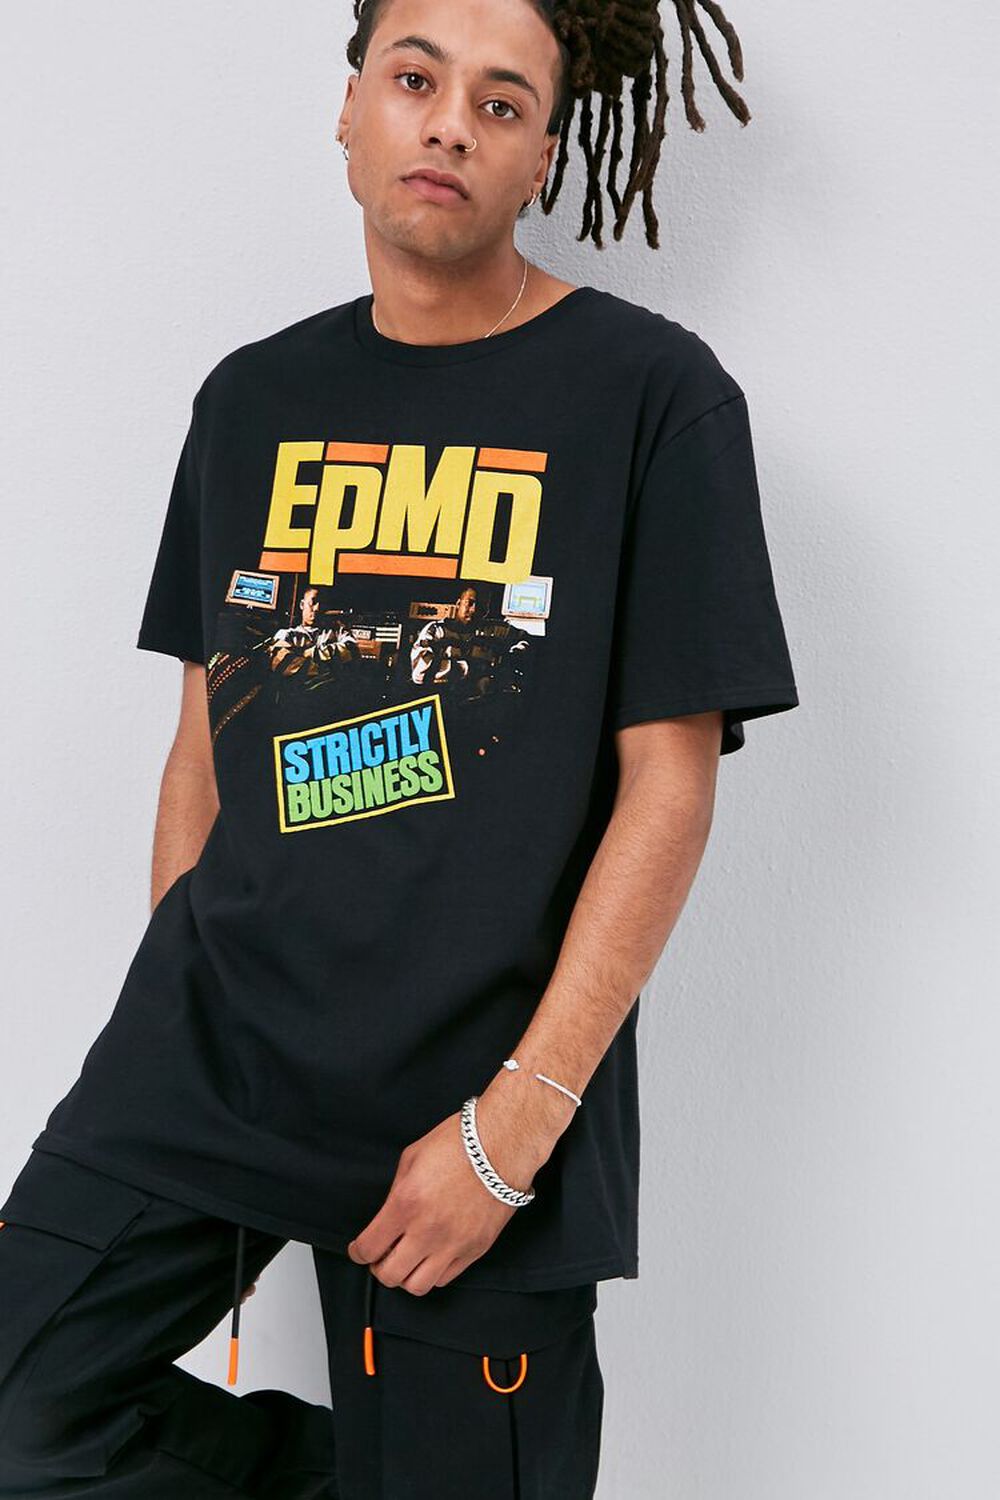 BLACK/YELLOW EPMD Strictly Business Graphic Tee, image 1